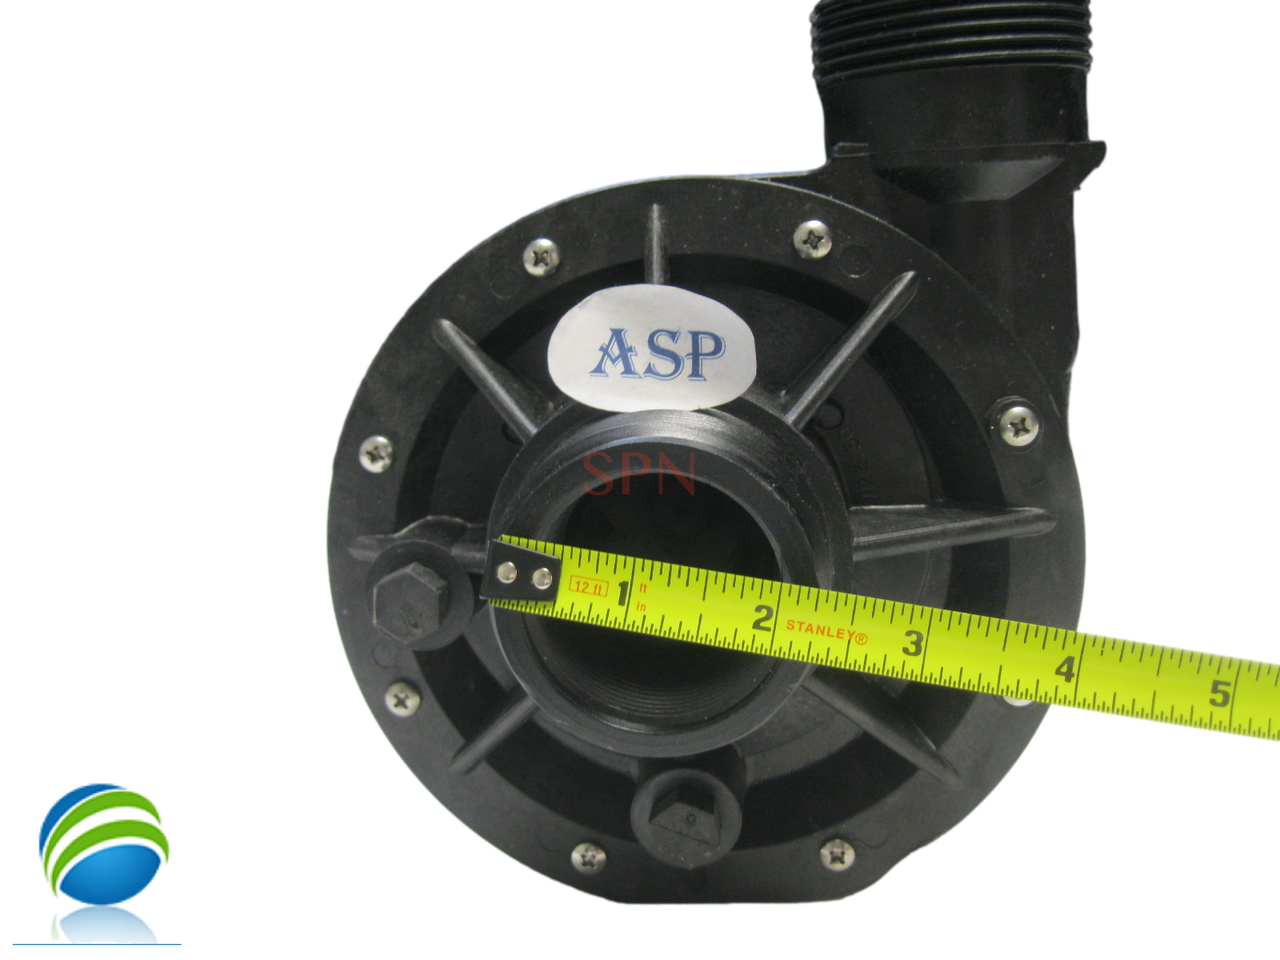 The inlet and outlet measure about 2 5/16" across the threads.. 
Complete Pump, Aqua-Flo, FMHP, 1.5HP, 115v, 48fr, 1-1/2" x 1 1/2" , 1 or 2 Speed  15.0A